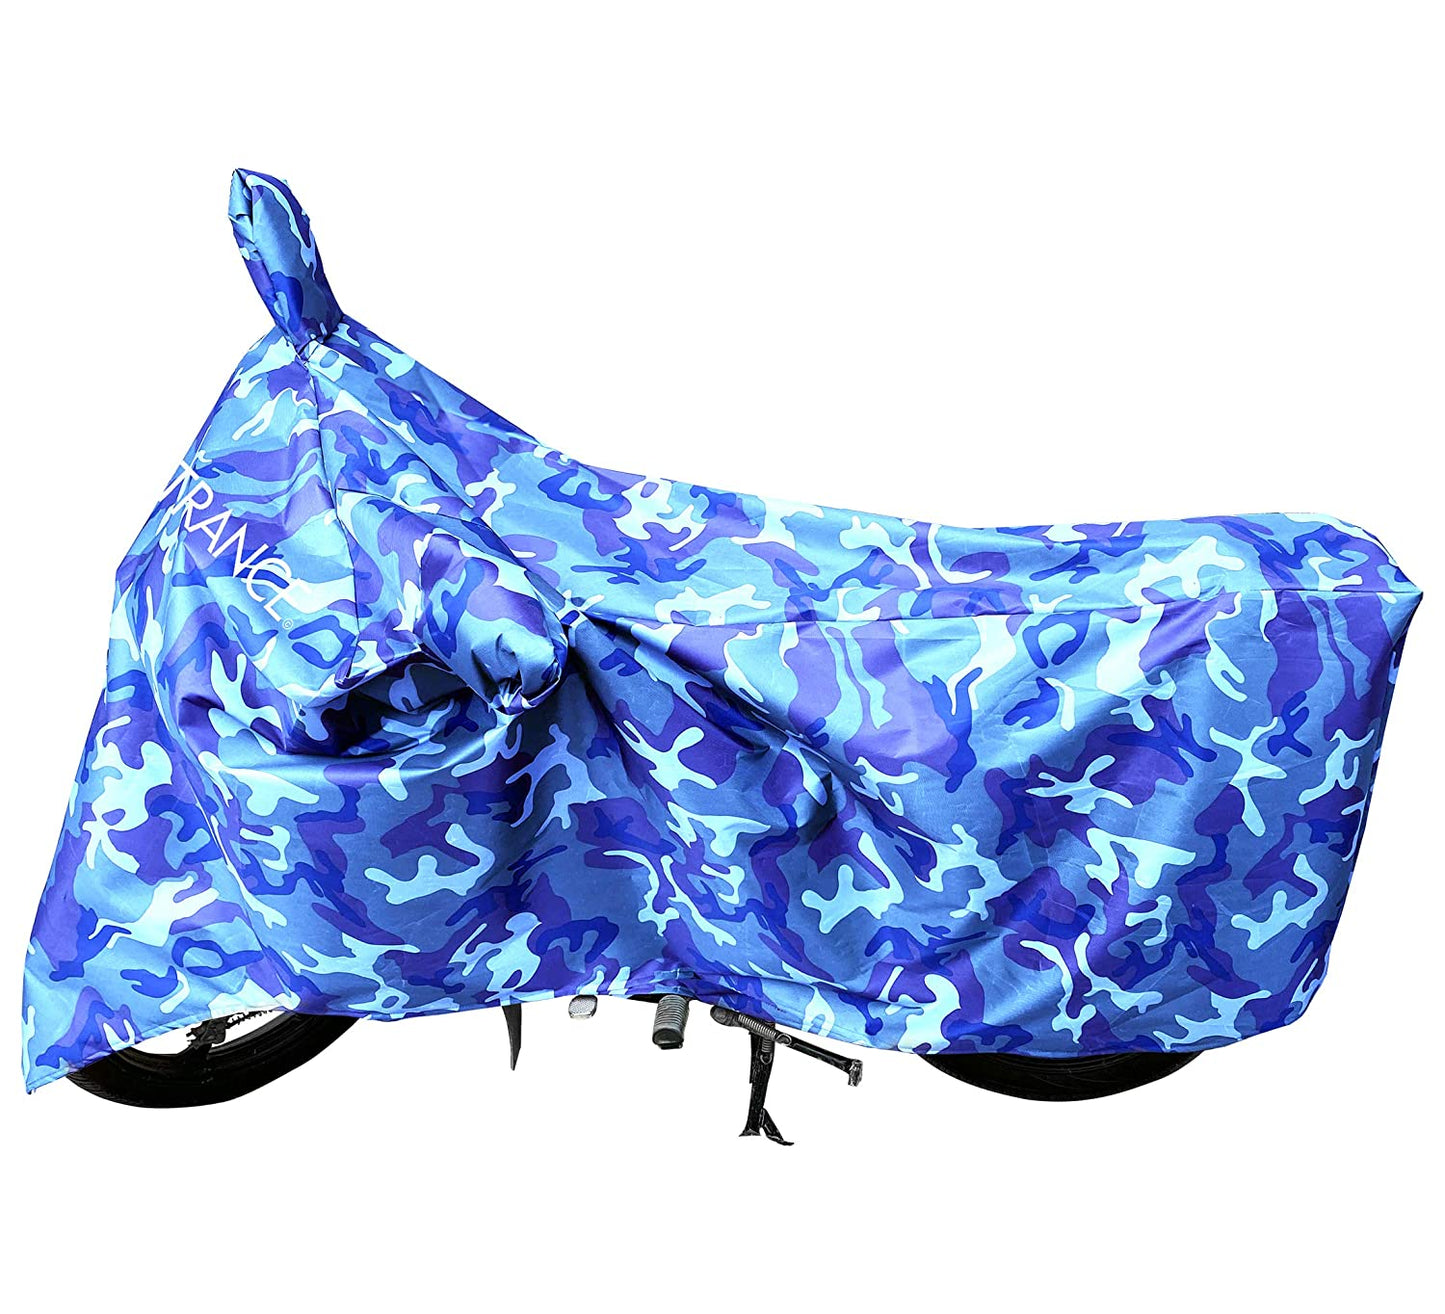 MotoTrance Jungle Bike Body Covers For Royal Enfield Squadron Blue - Interlock-Stitched Waterproof and Heat Resistant with Mirror Pockets